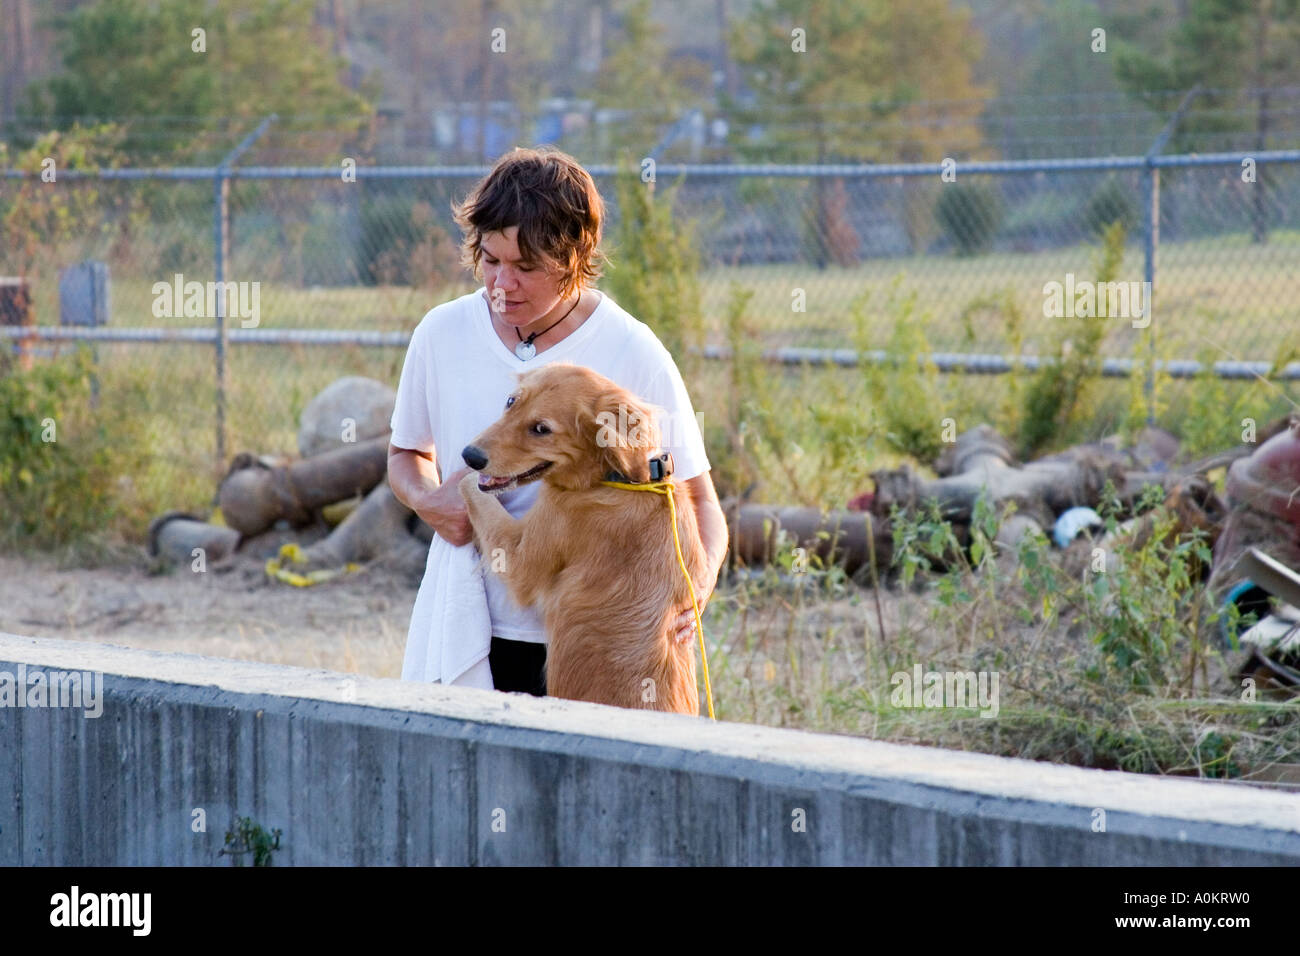 A happy dog jumps up on a volunteer at an emergency animal shelter in Slidell Louisiana Stock Photo